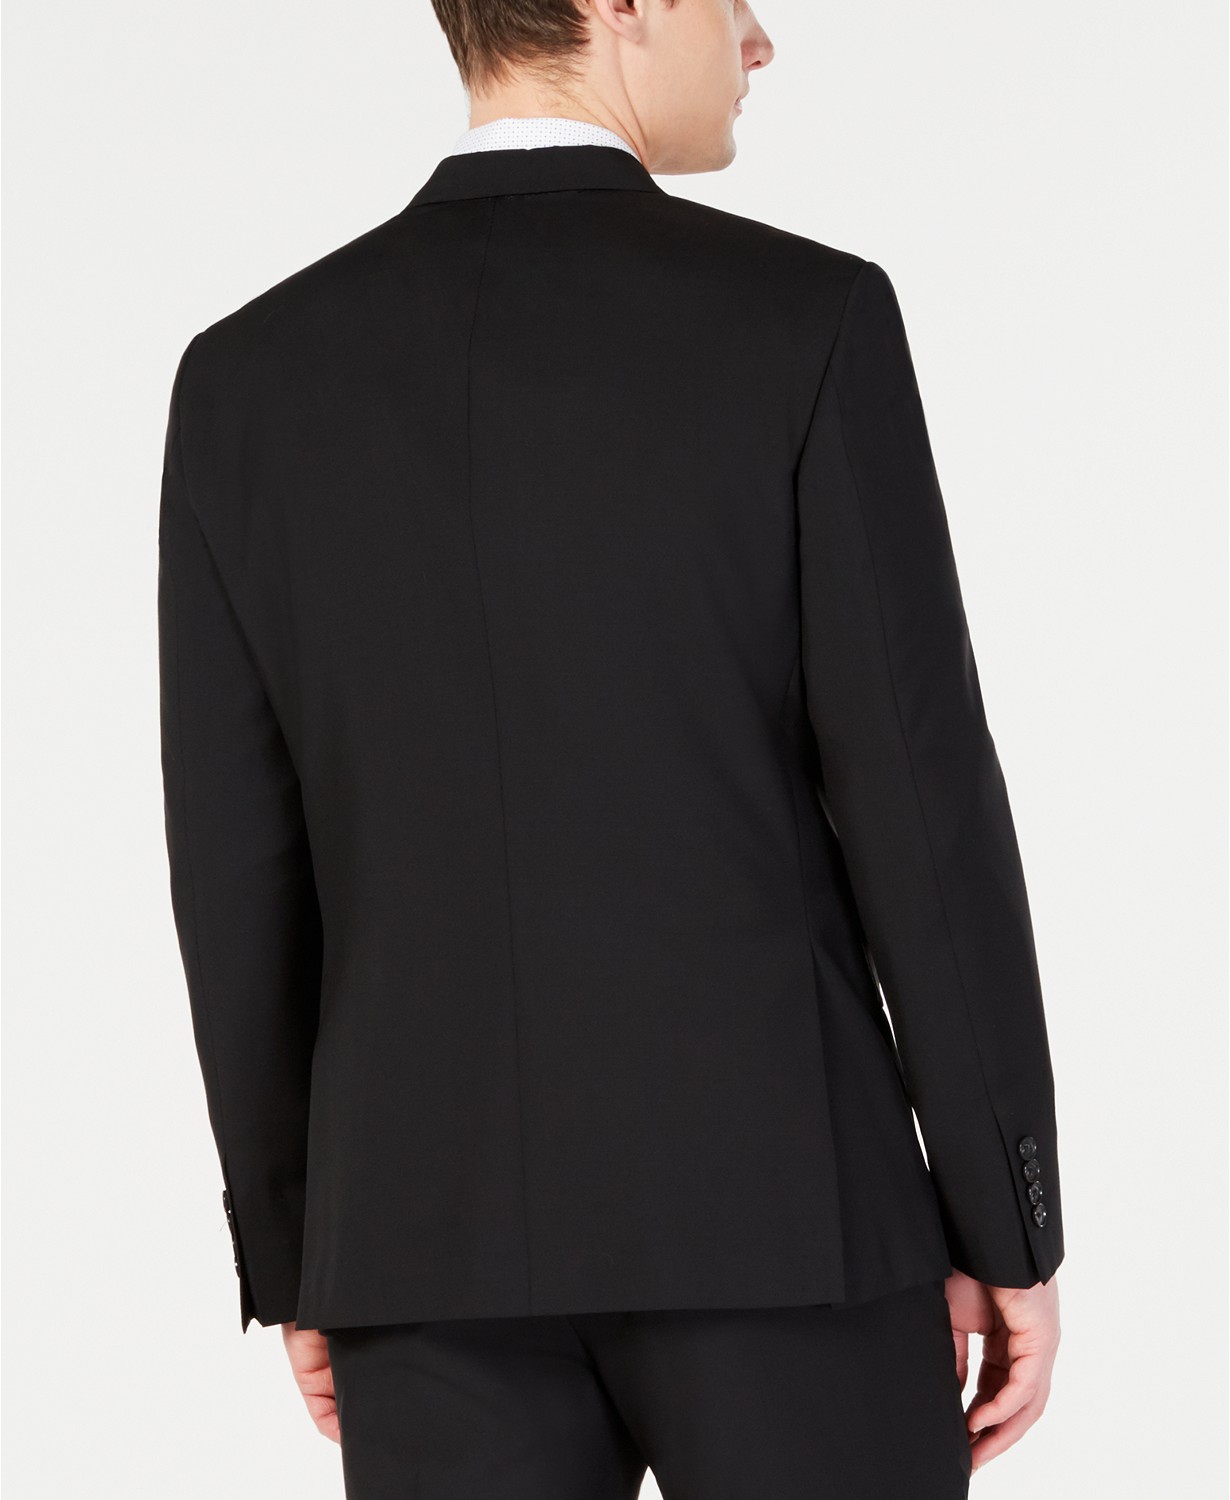 www.couturepoint.com-dkny-mens-black-wool-blend-modern-fit-stretch-solid-regular-suit-jacket